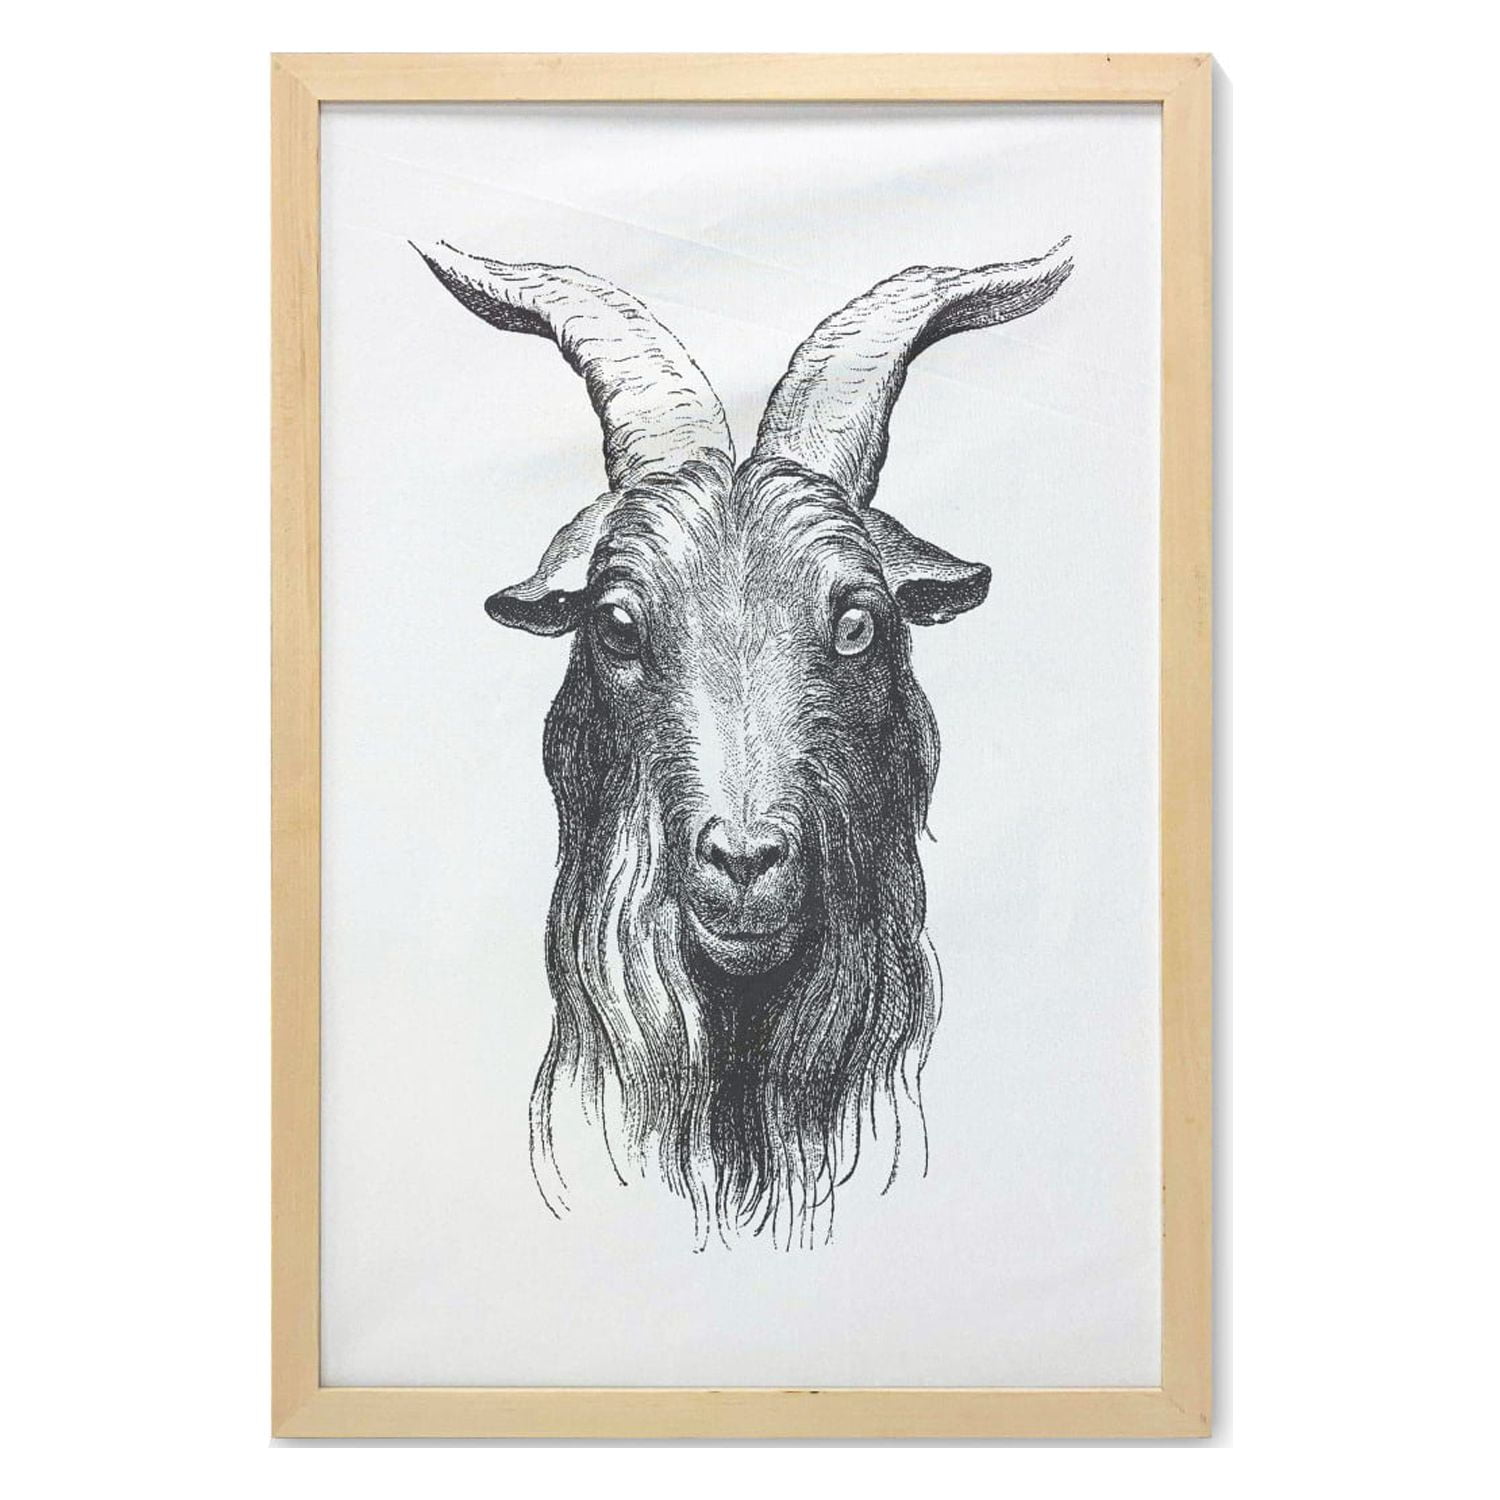 Goat Wall Art with Frame, Vintage Engraved Image of Goat Head